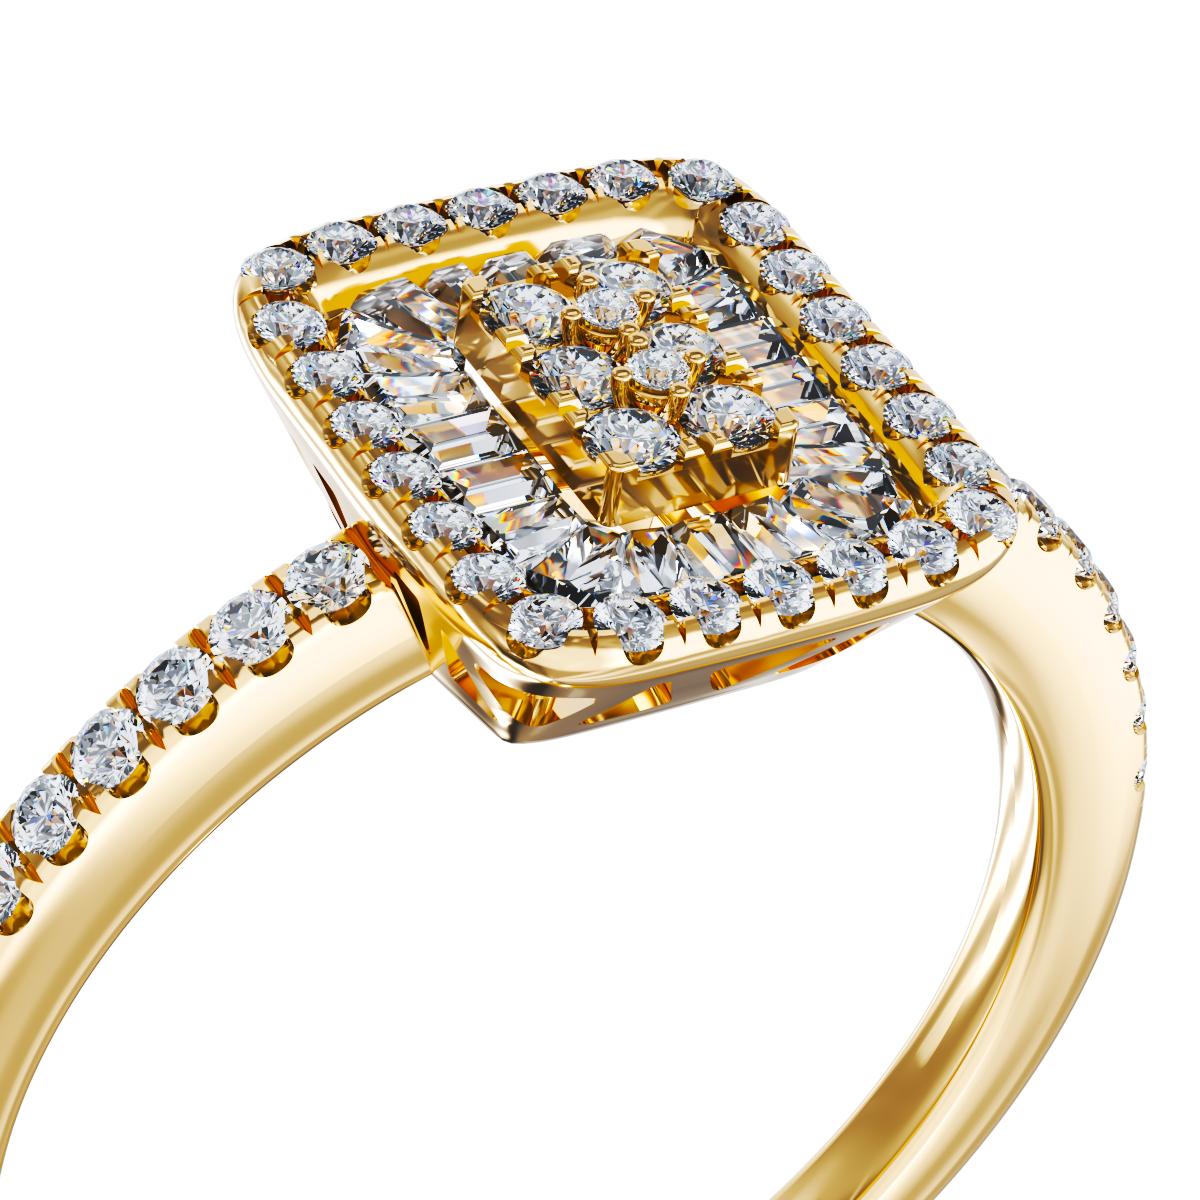 18K yellow gold engagement ring with 0.29ct diamonds